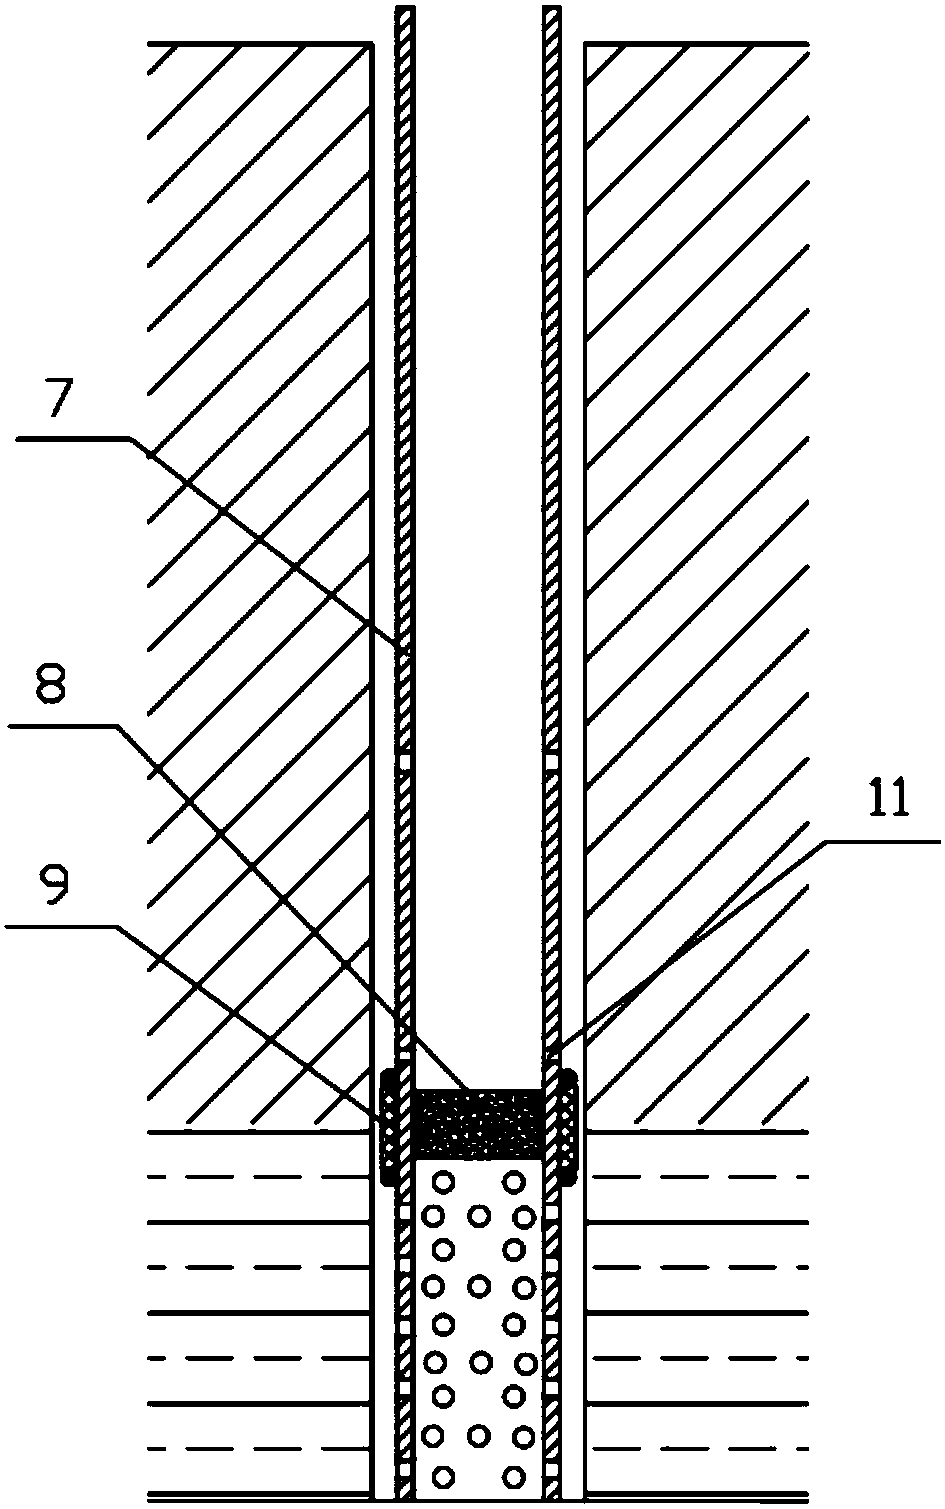 Fixed-point quantitative grouting device and system